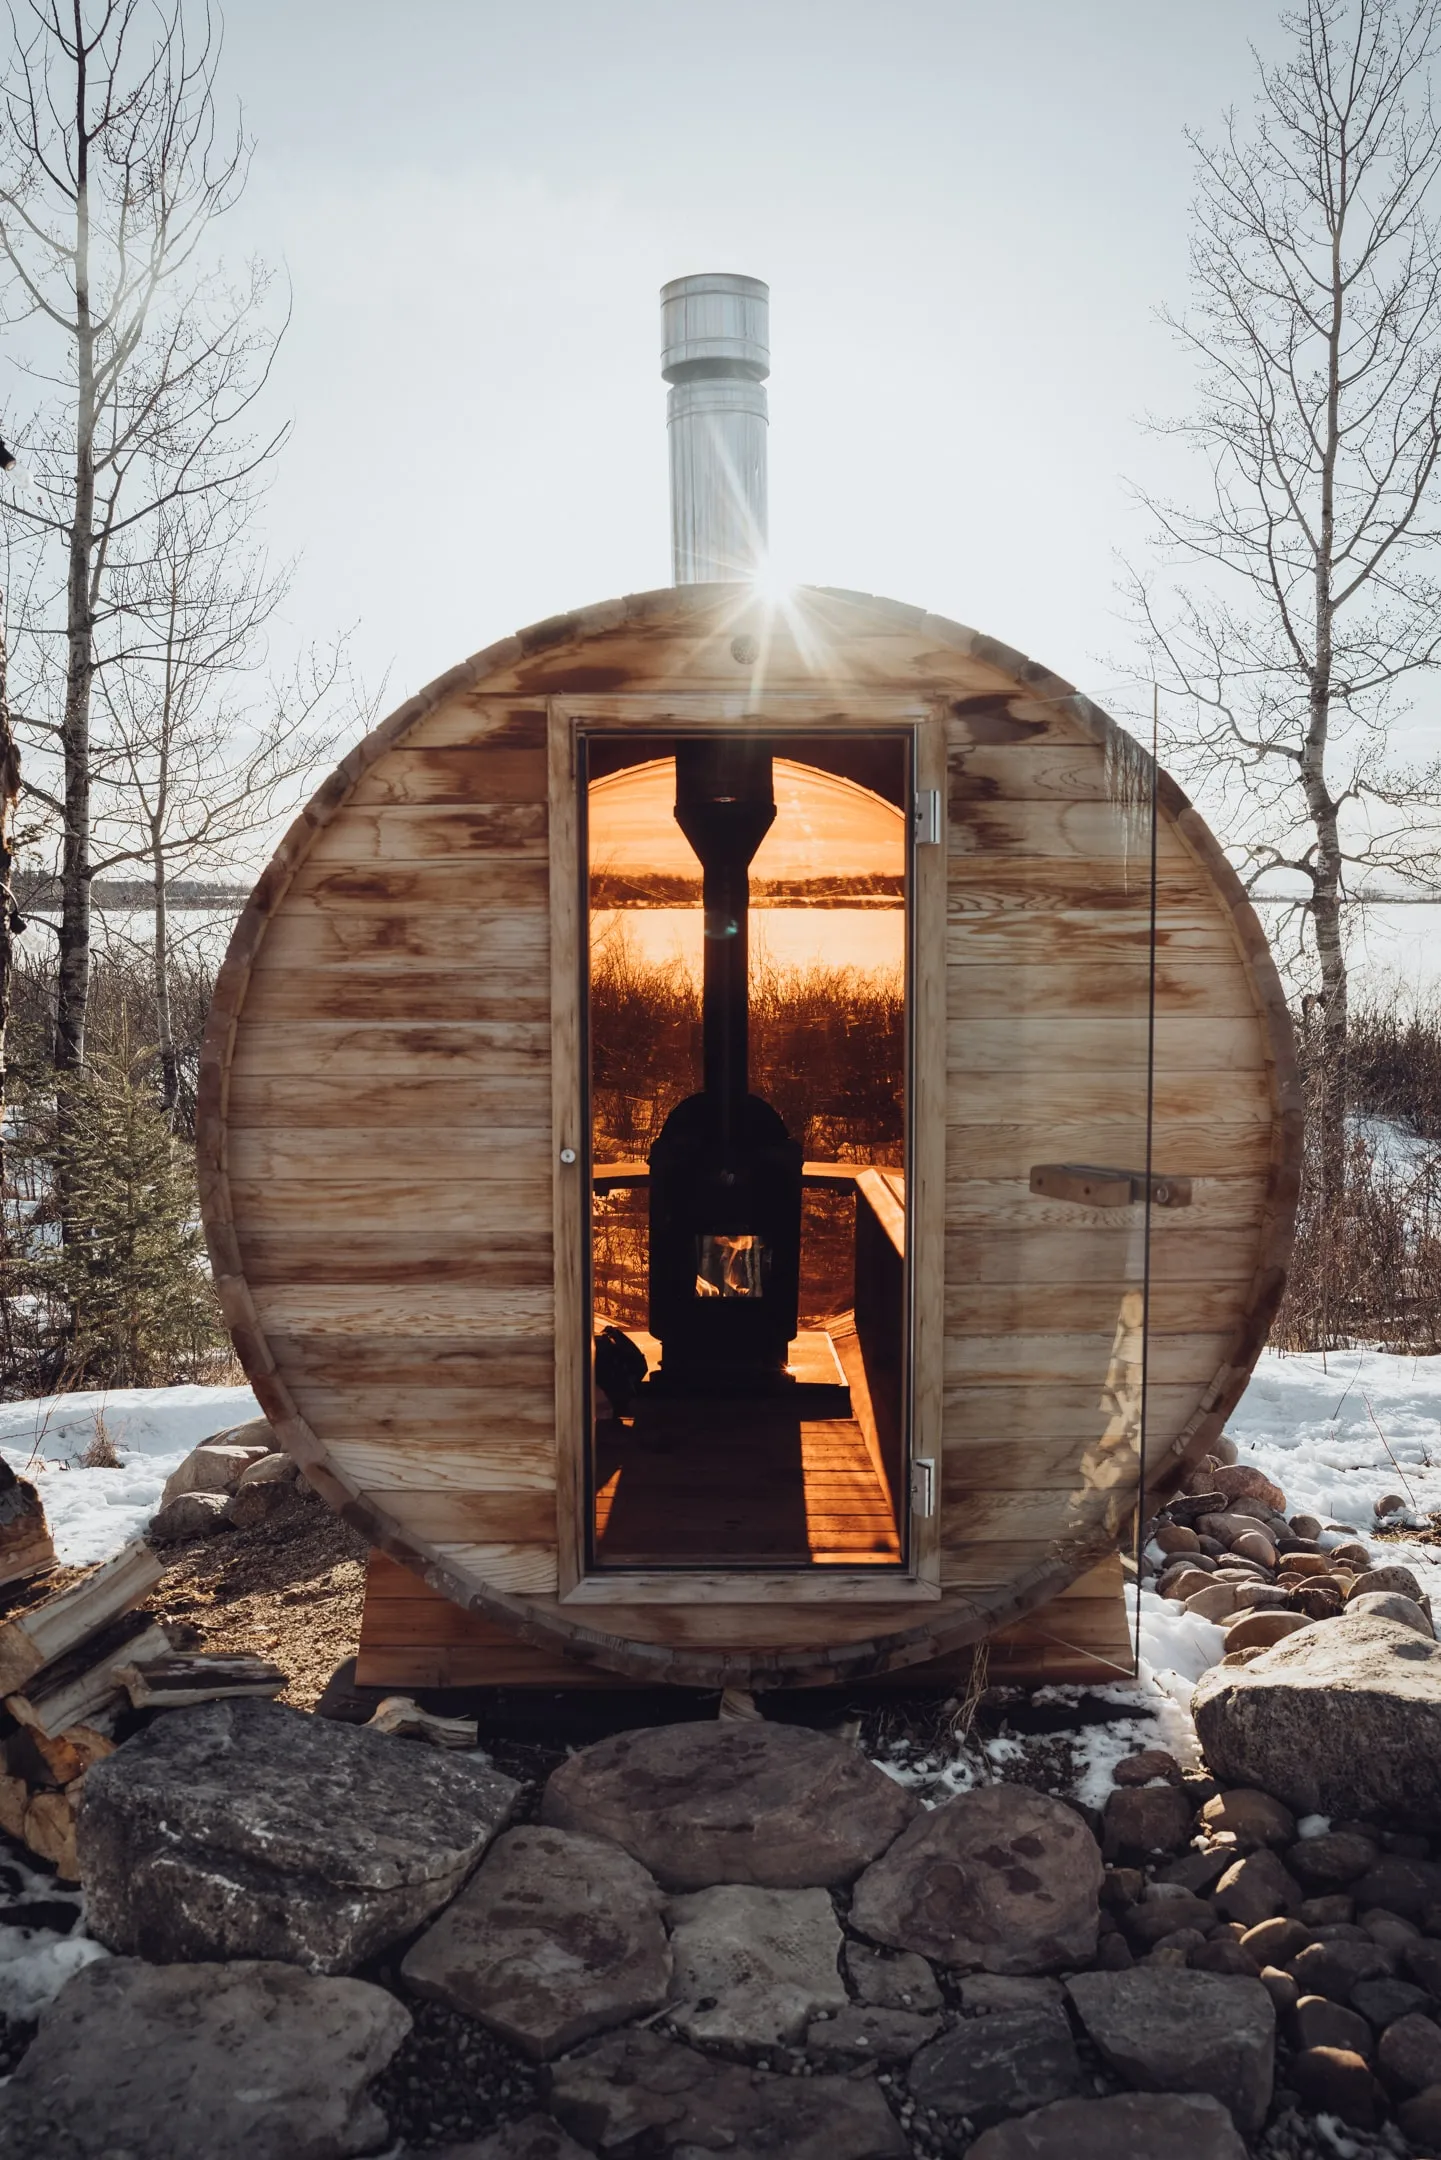 front view shot of ignis dome outdoor sauna during the winter